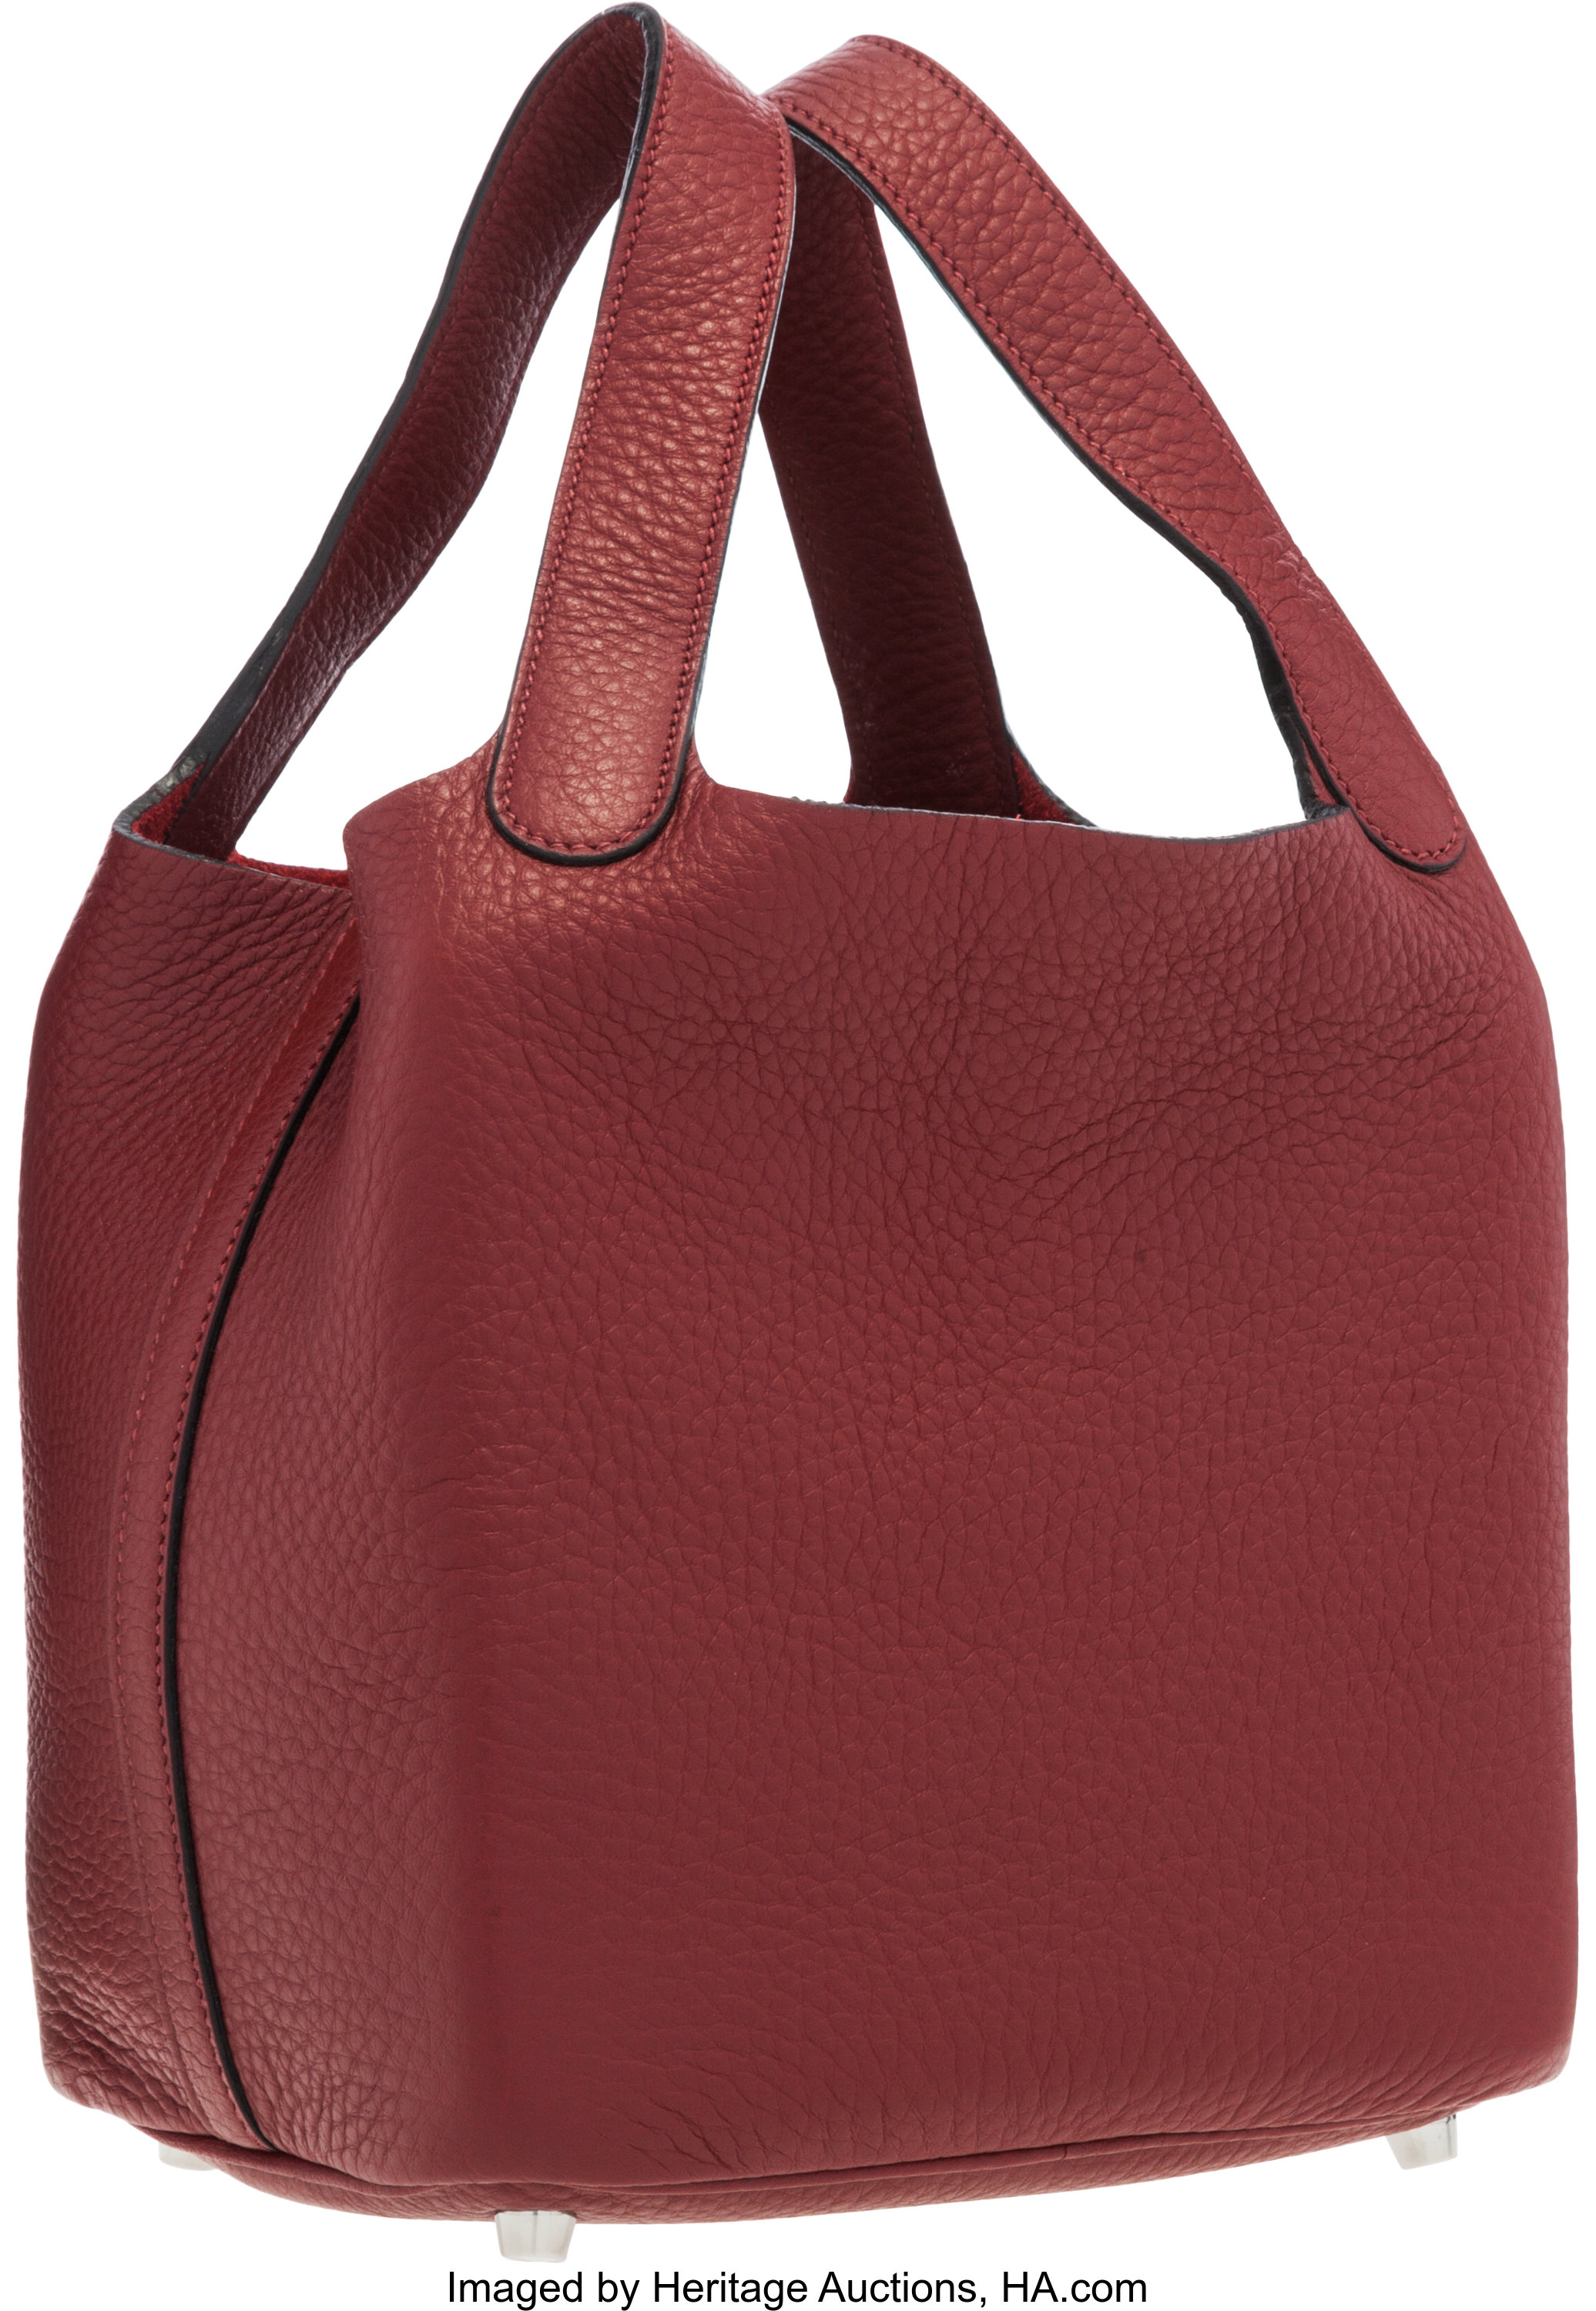 Hermes Rouge H Clemence Leather Picotin PM Bag with Palladium